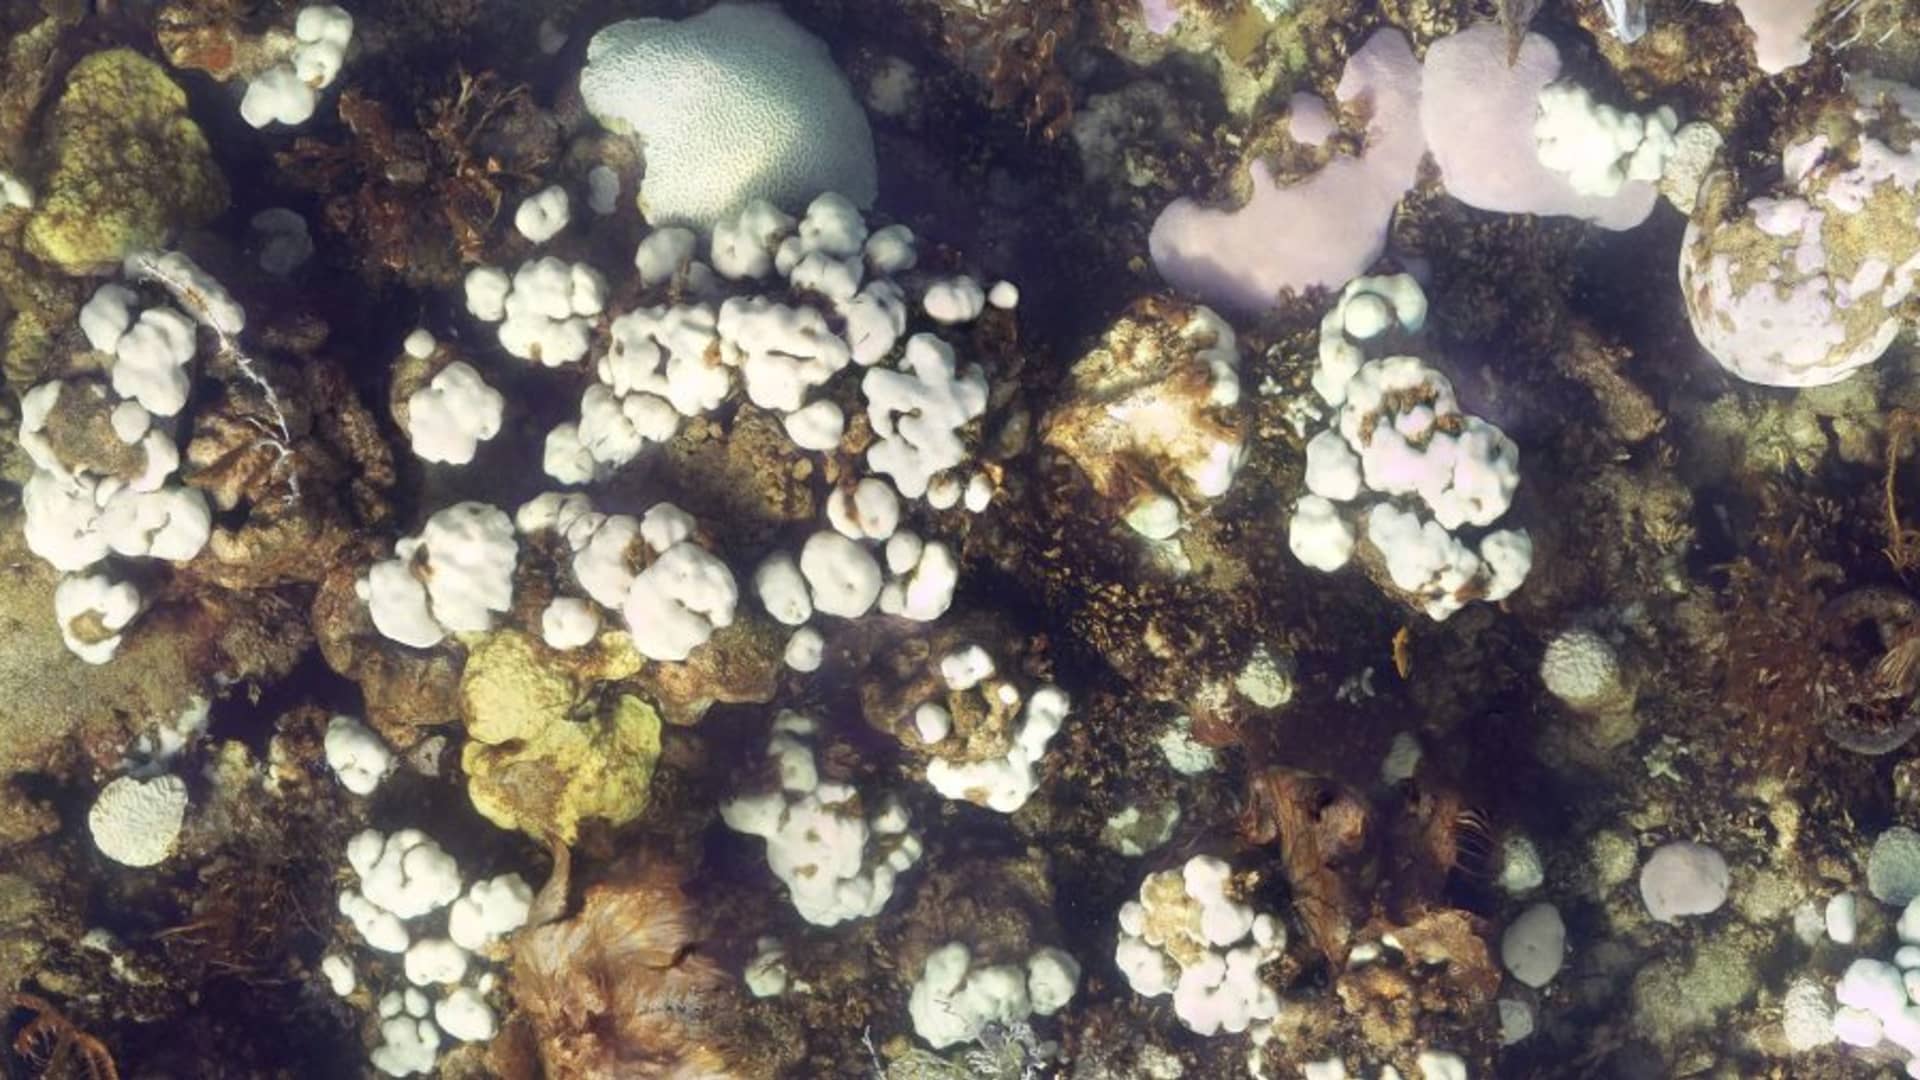 This is a photo of the coral reef called Cheeca Rocks, located within the Florida Keys National Marine Sanctuary, taken on July 24, 2023, after coral bleaching occurred.